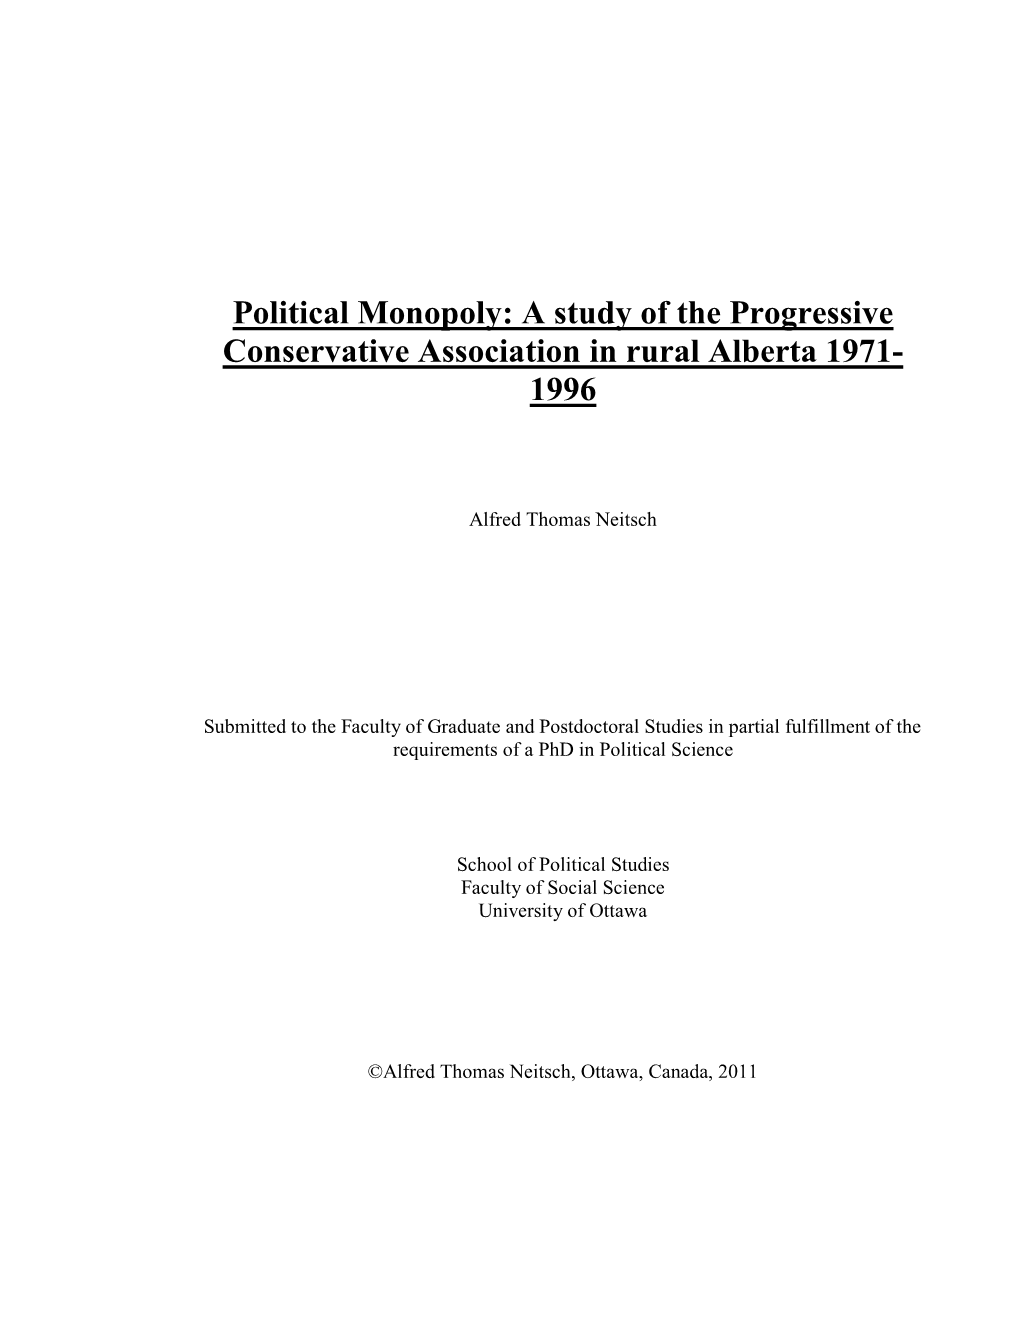 Political Monopoly: a Study of the Progressive Conservative Association in Rural Alberta 1971- 1996